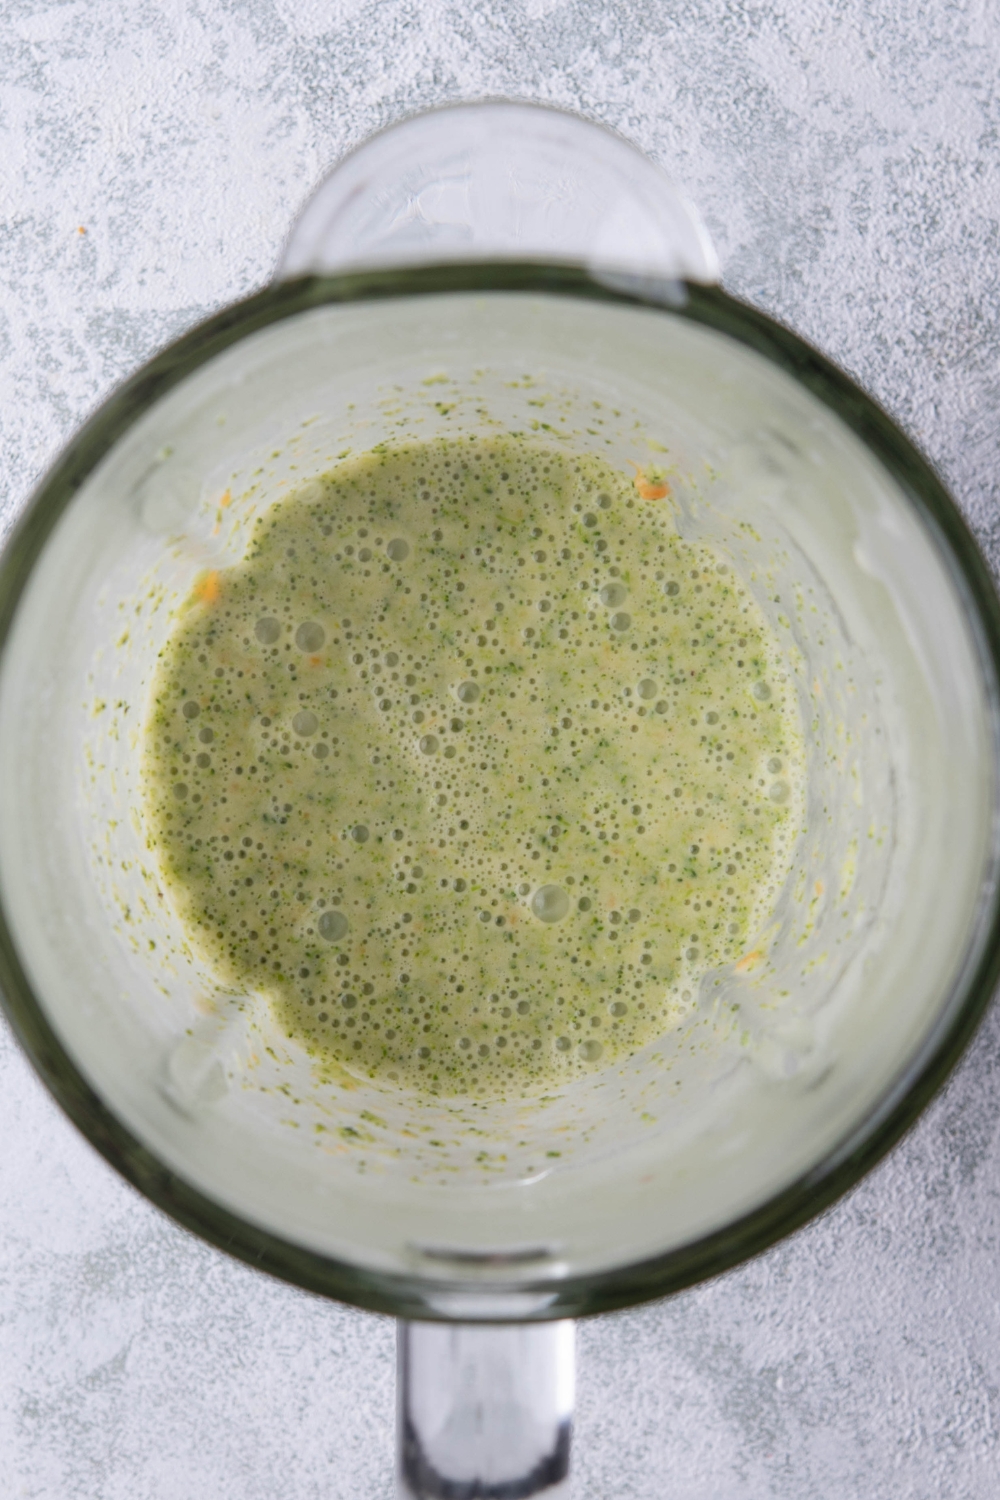 A blender with blended broccoli soup in it.